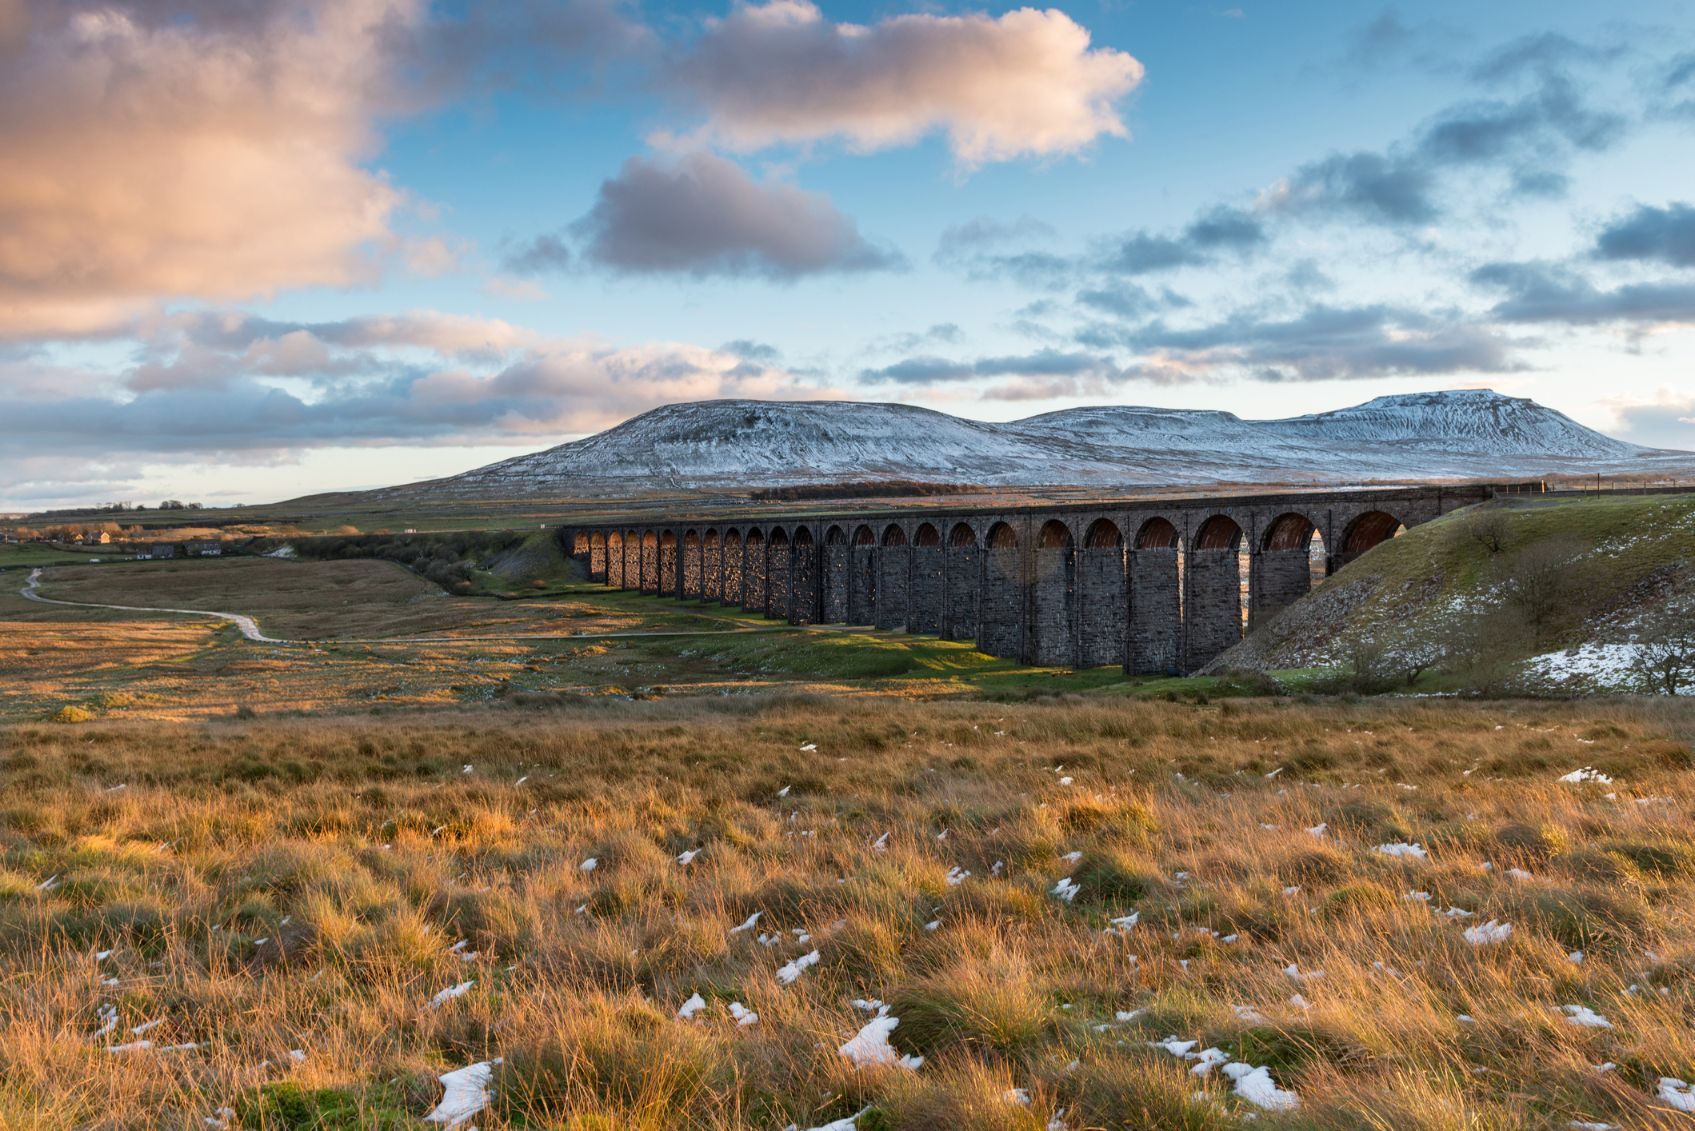 Ribblehead Viaduct in in the Yorkshire Dales. The viaduct carries the Settle-Carlisle railway, built by Midland railway 1870-1874. Photo: Getty